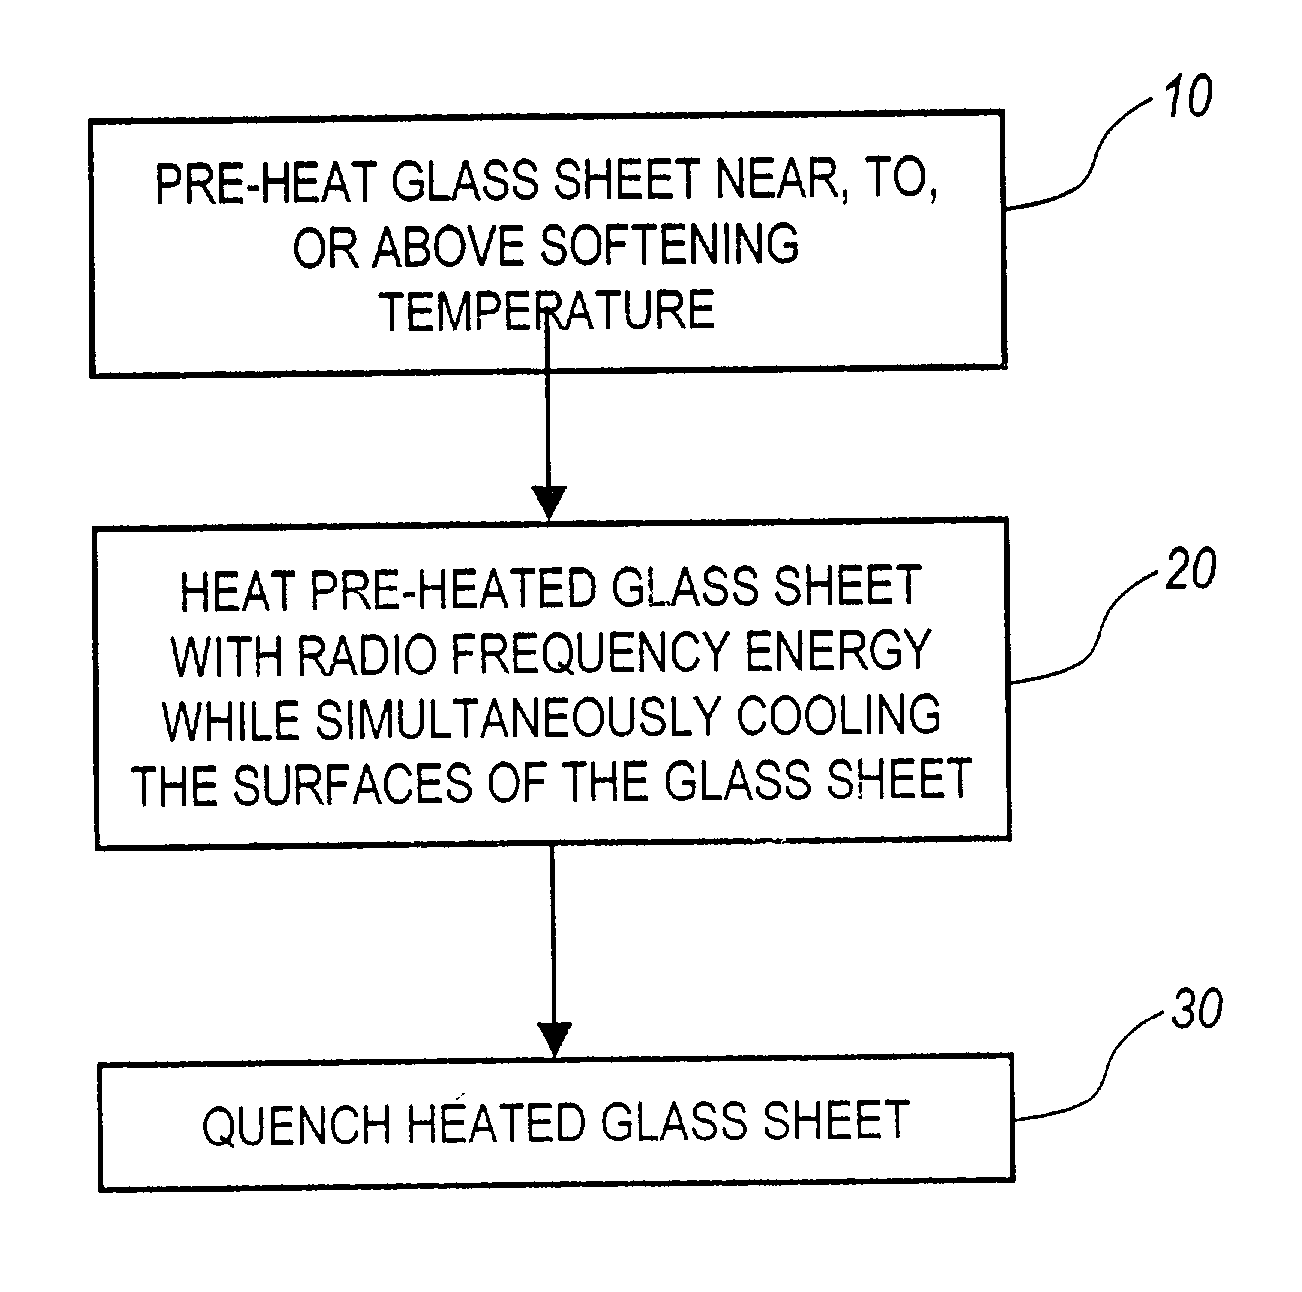 System and method for simultaneously heating and cooling glass to produce tempered glass